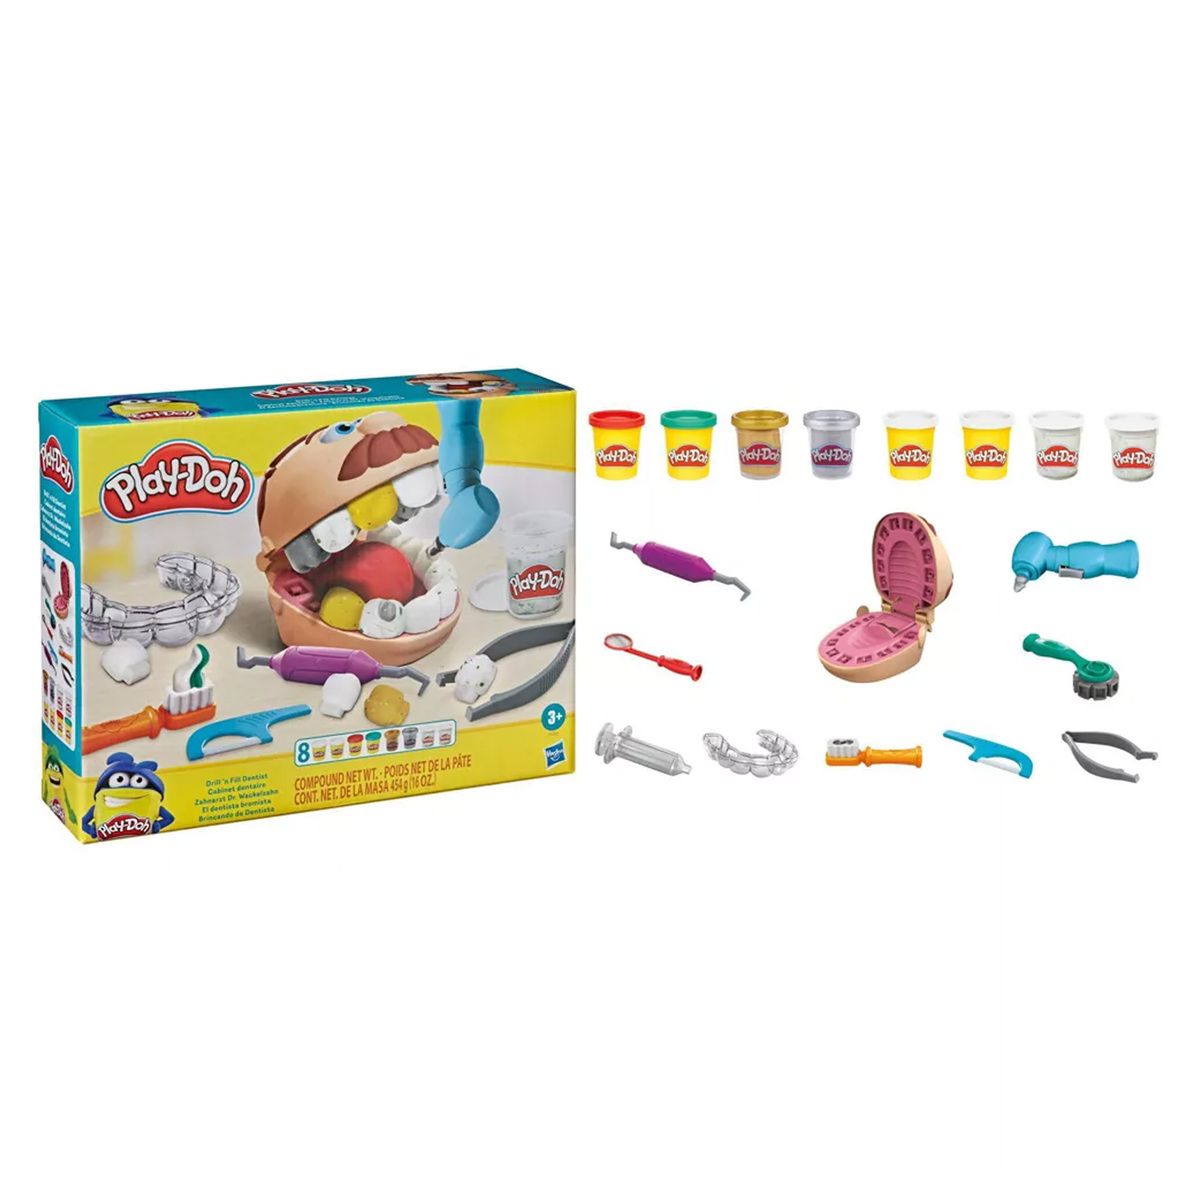 Playdoh Drill & Fill Dentist Art And Crafts Activity Toy for Kids, F12595L00